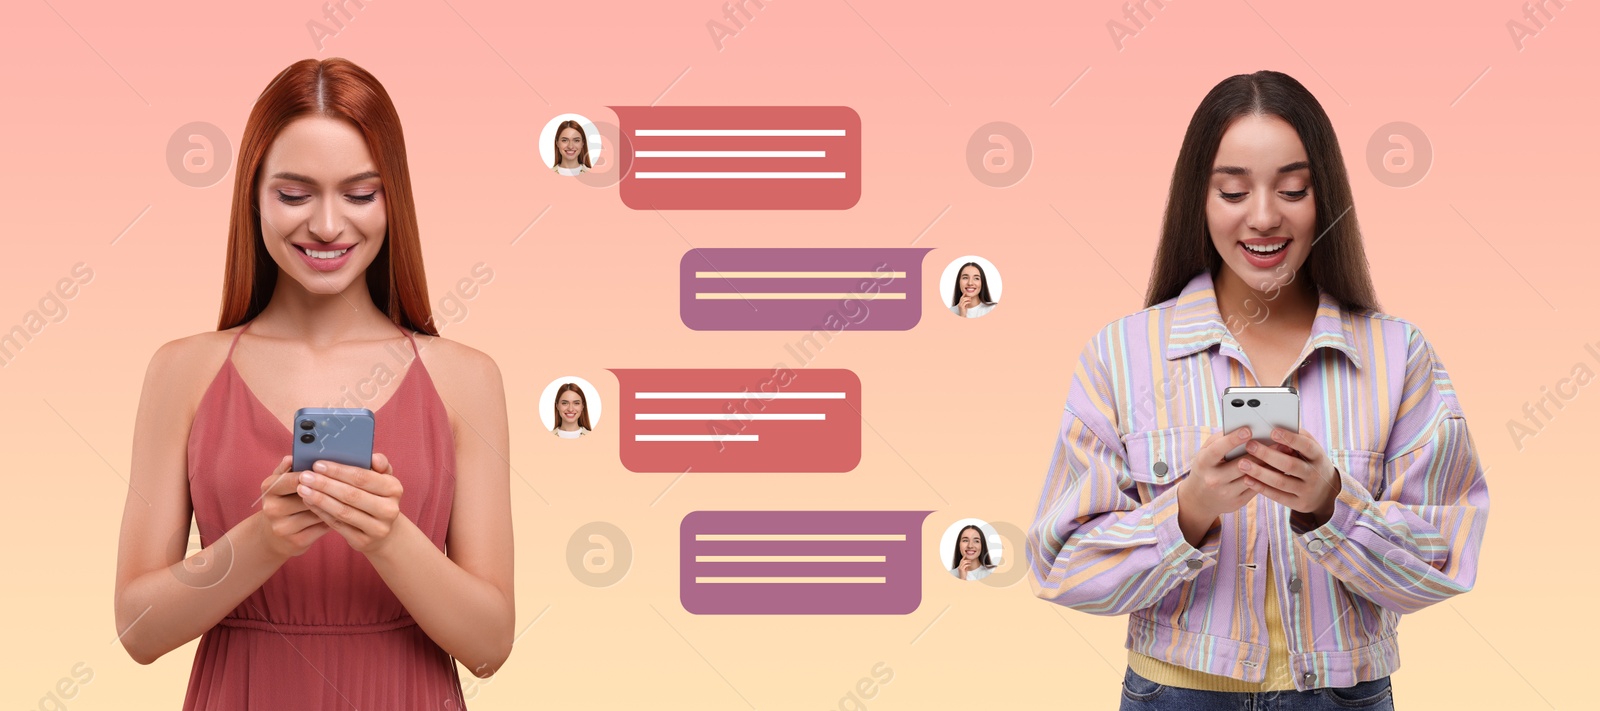 Image of Women with smartphones texting on color gradient background, banner design. Message bubbles between them